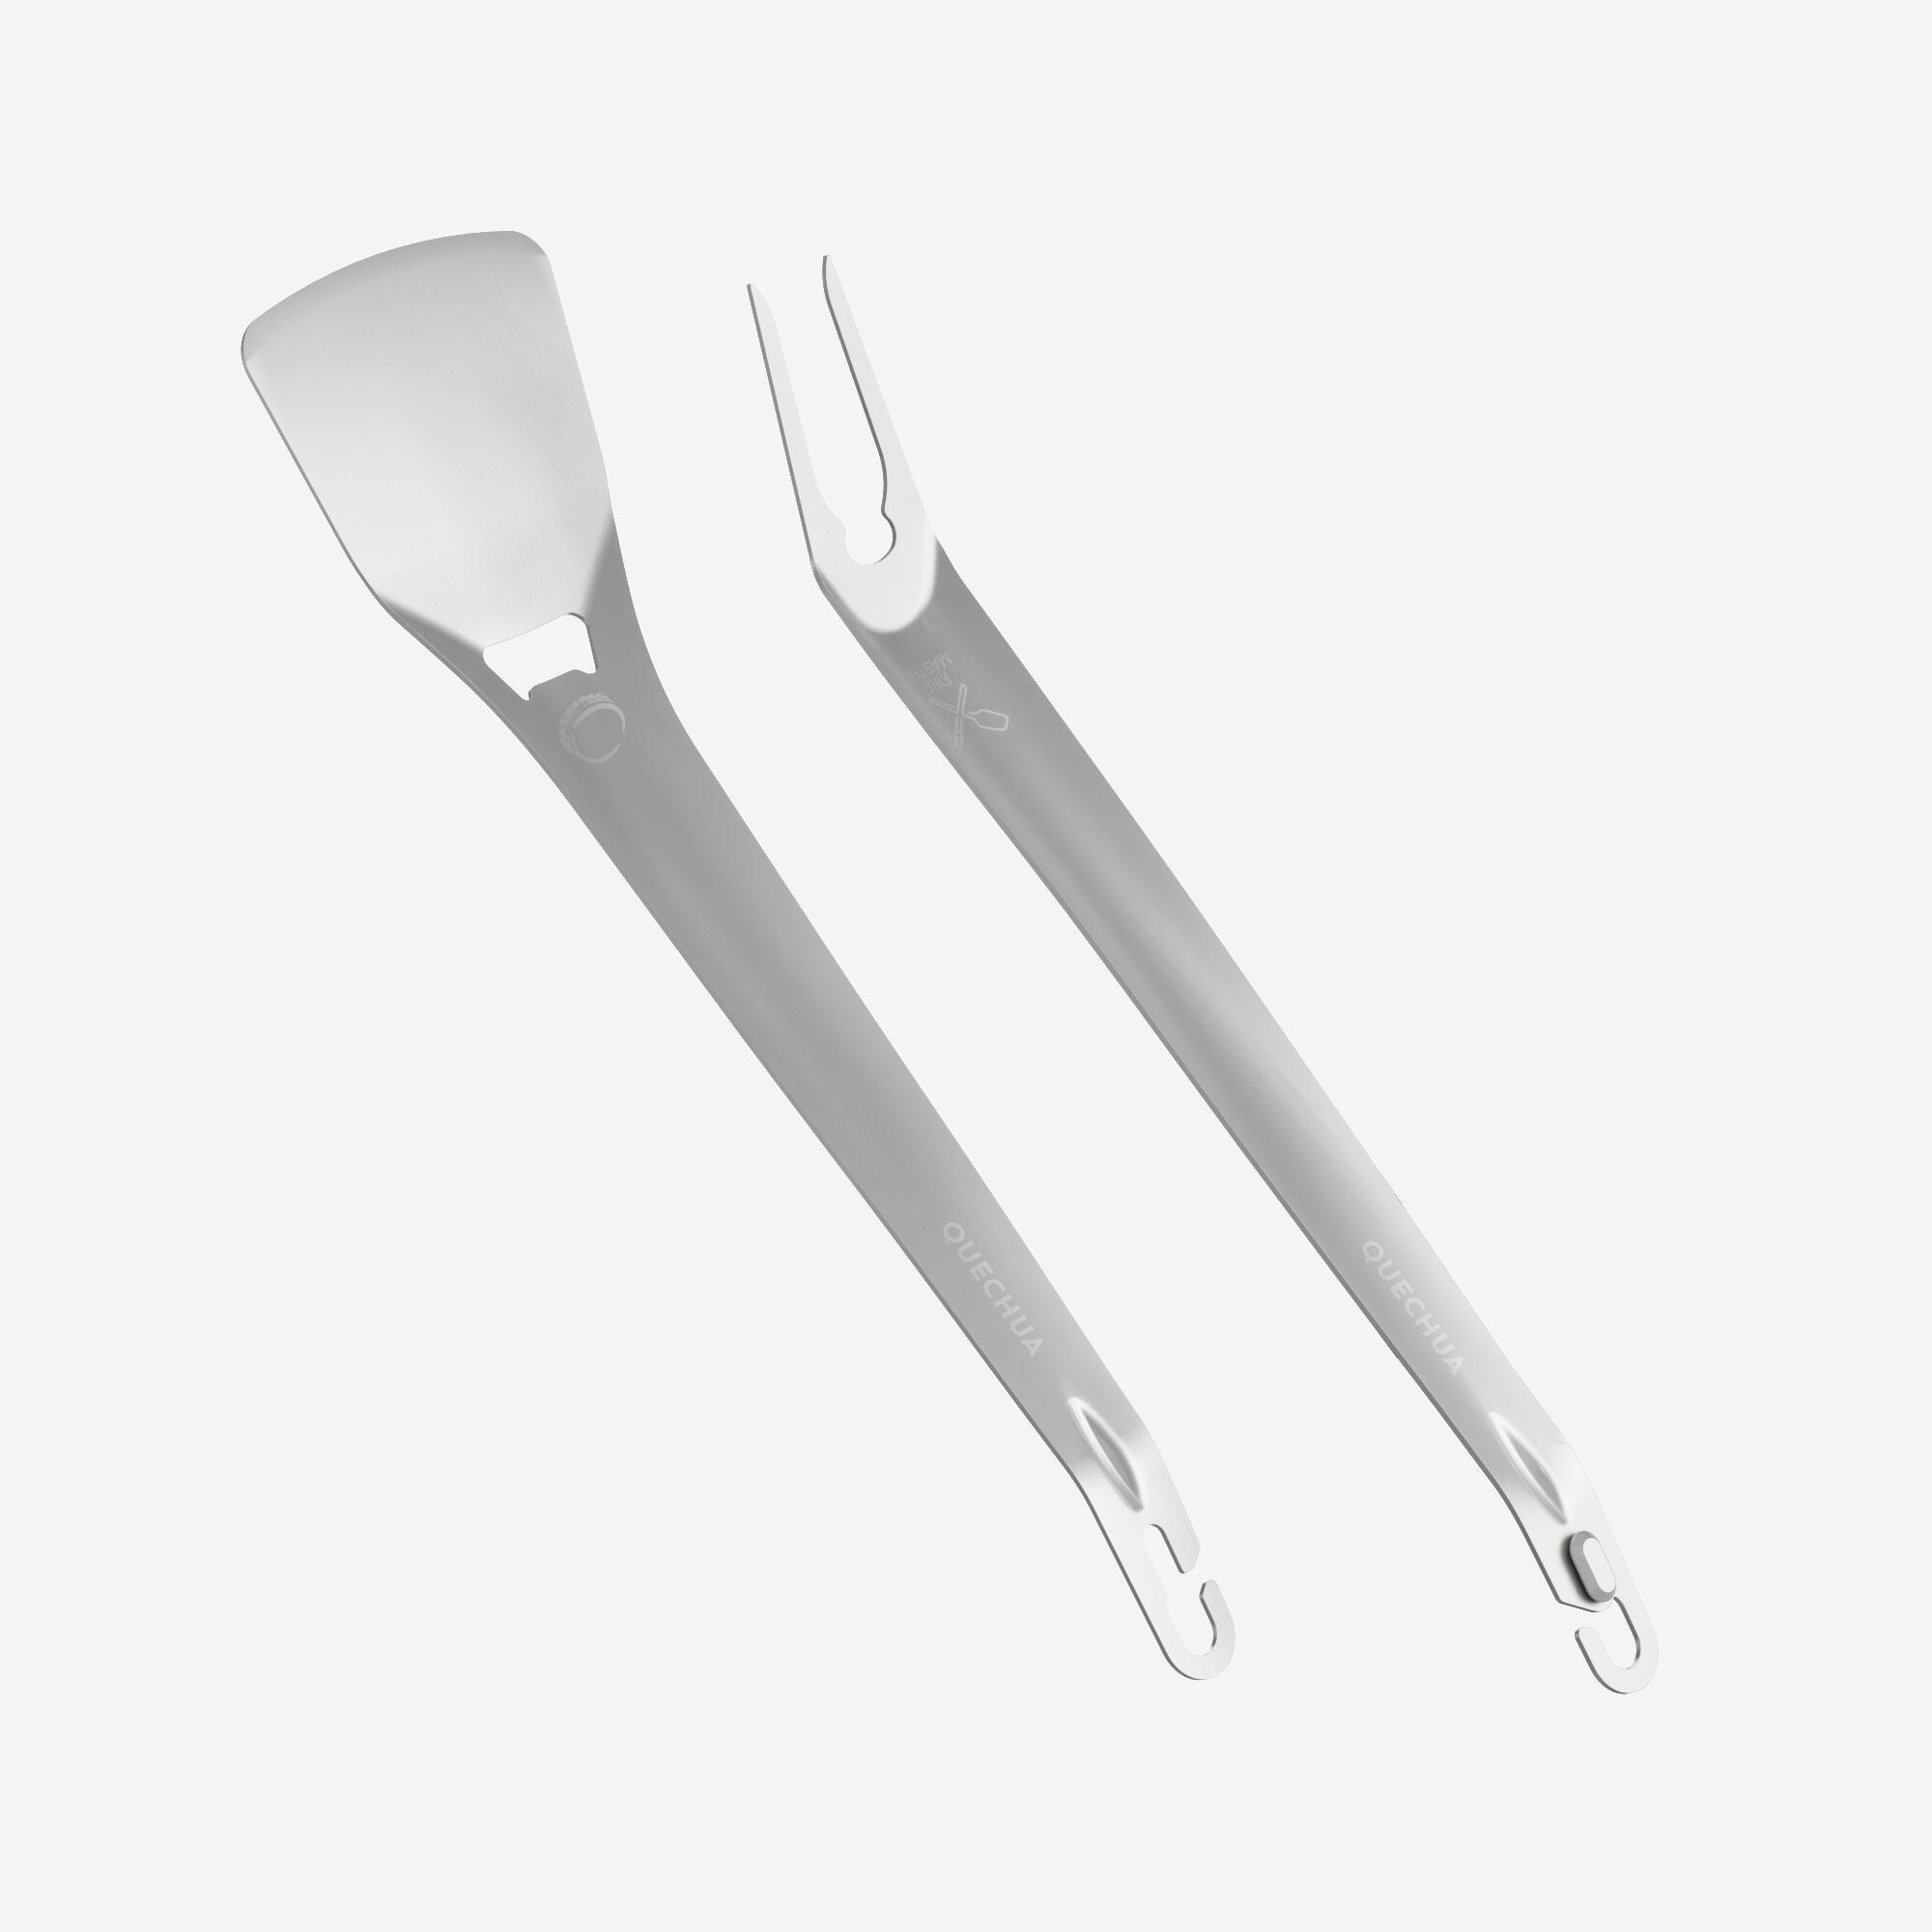 Set of 2 stainless-steel utensils, spatula and fork, for camping 1/5